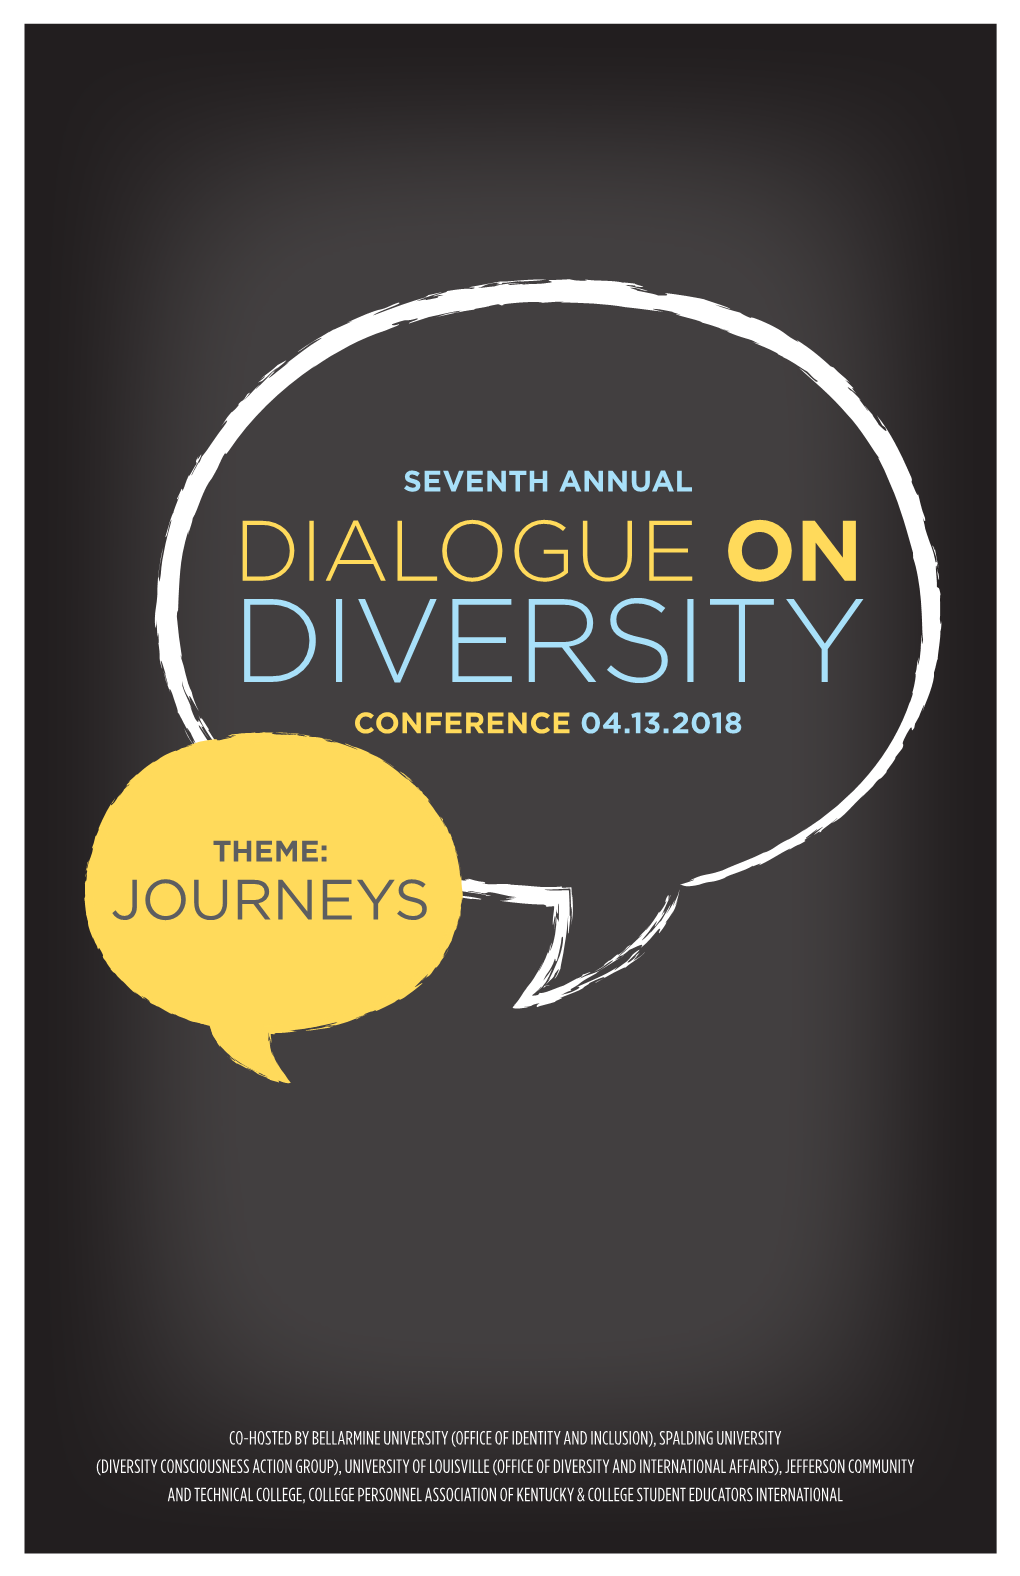 Diversity Conference 04.13.2018